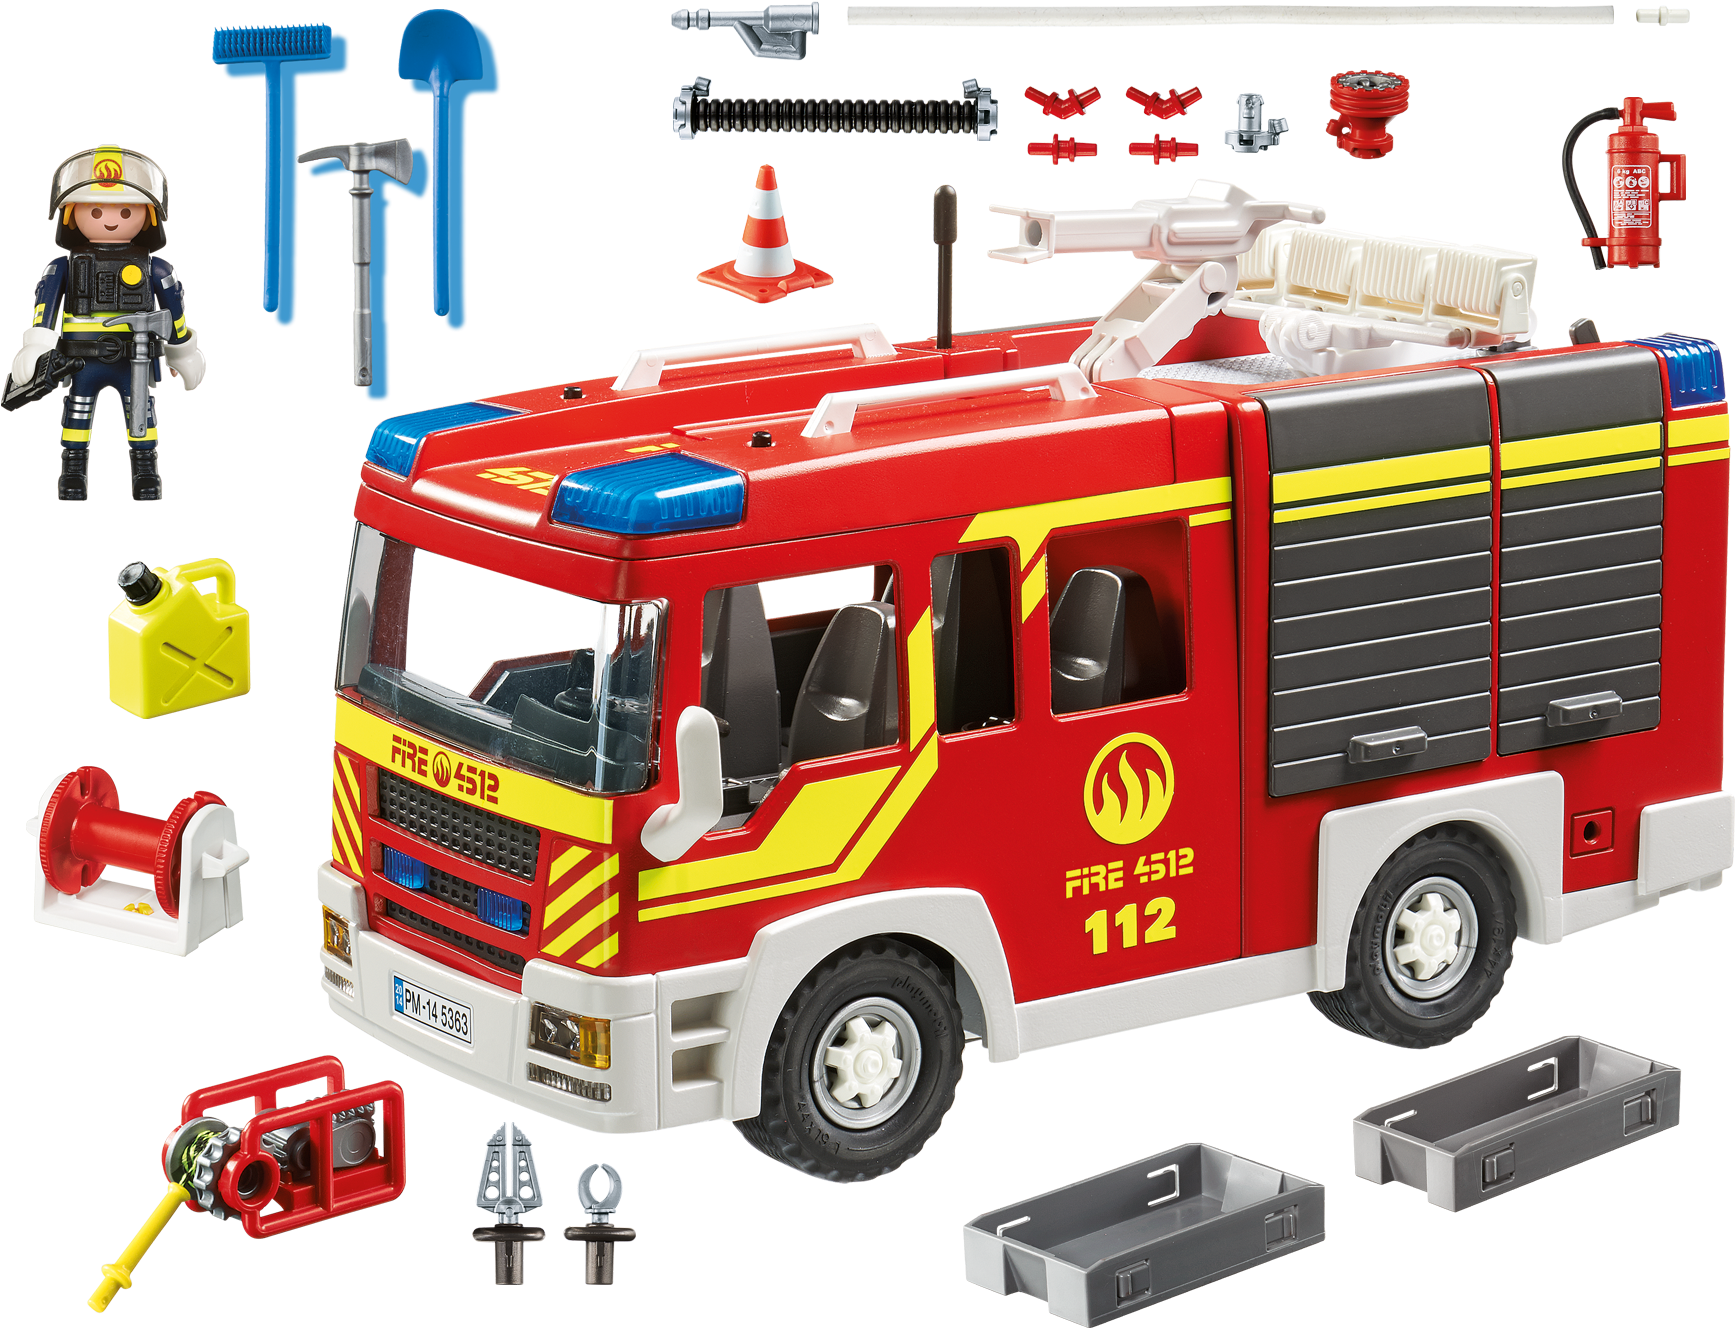 Http - //media - Playmobil - Com/i/playmobil/5363 Product - Playmobil Fire Engine With Lights And Sound 5363 (2000x1400)